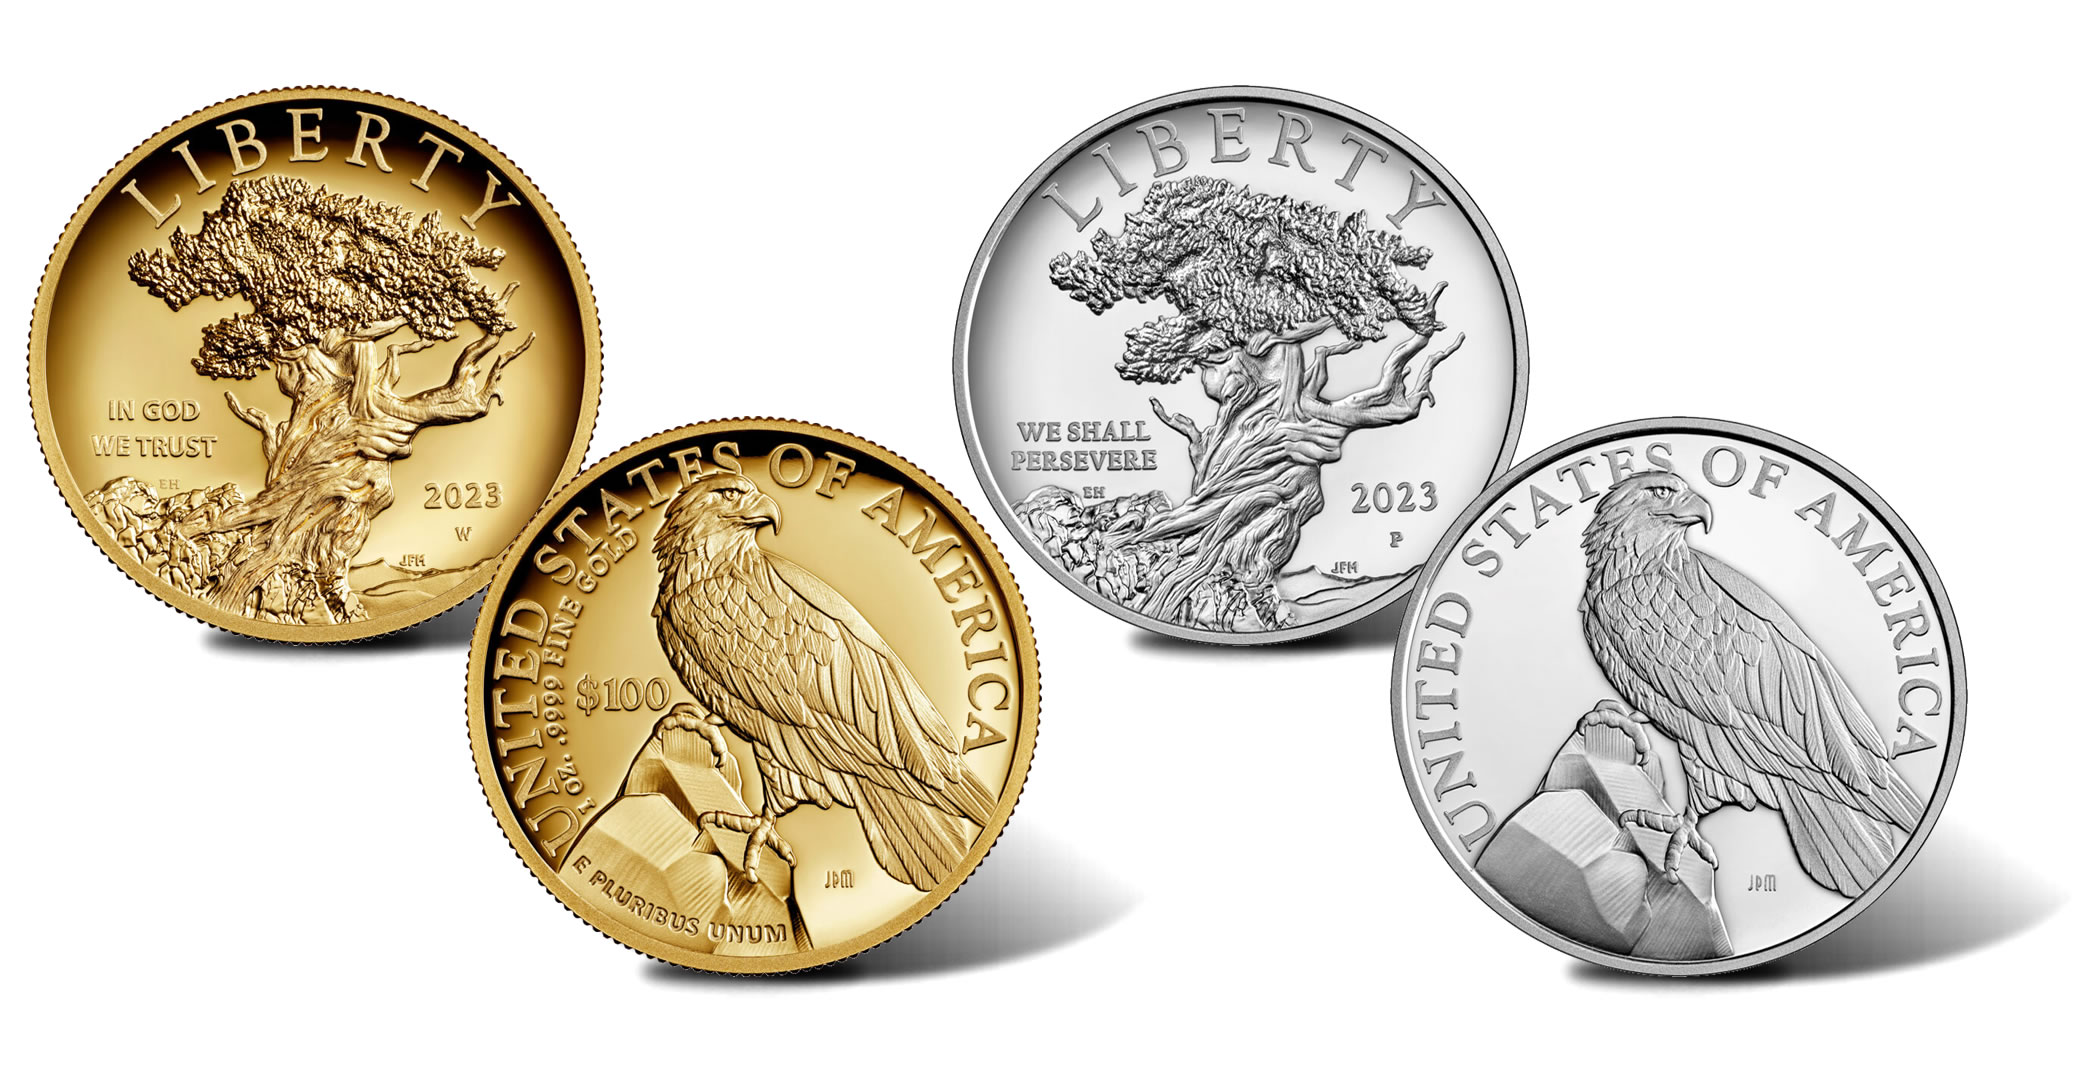 2023 American Liberty Gold Coin and Medal Images Unveiled